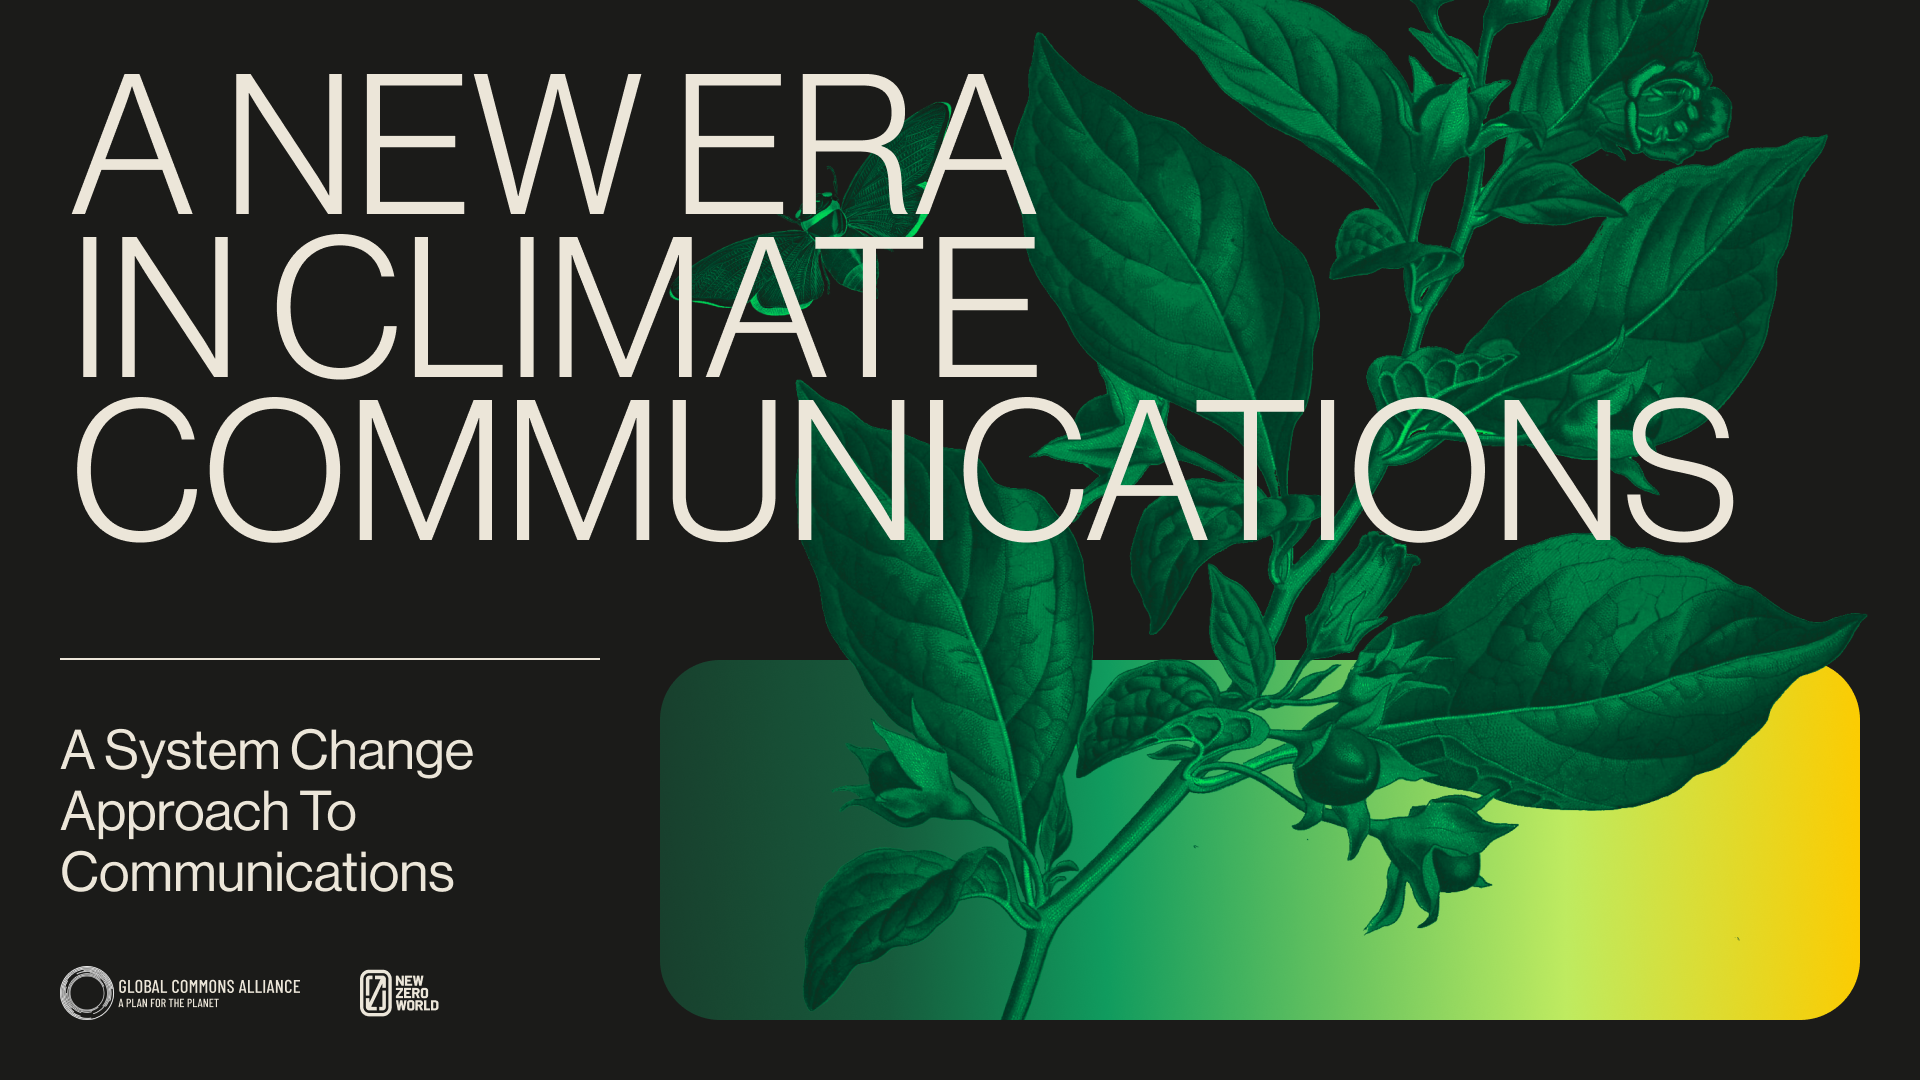 We launched A New Era In Climate Communications!